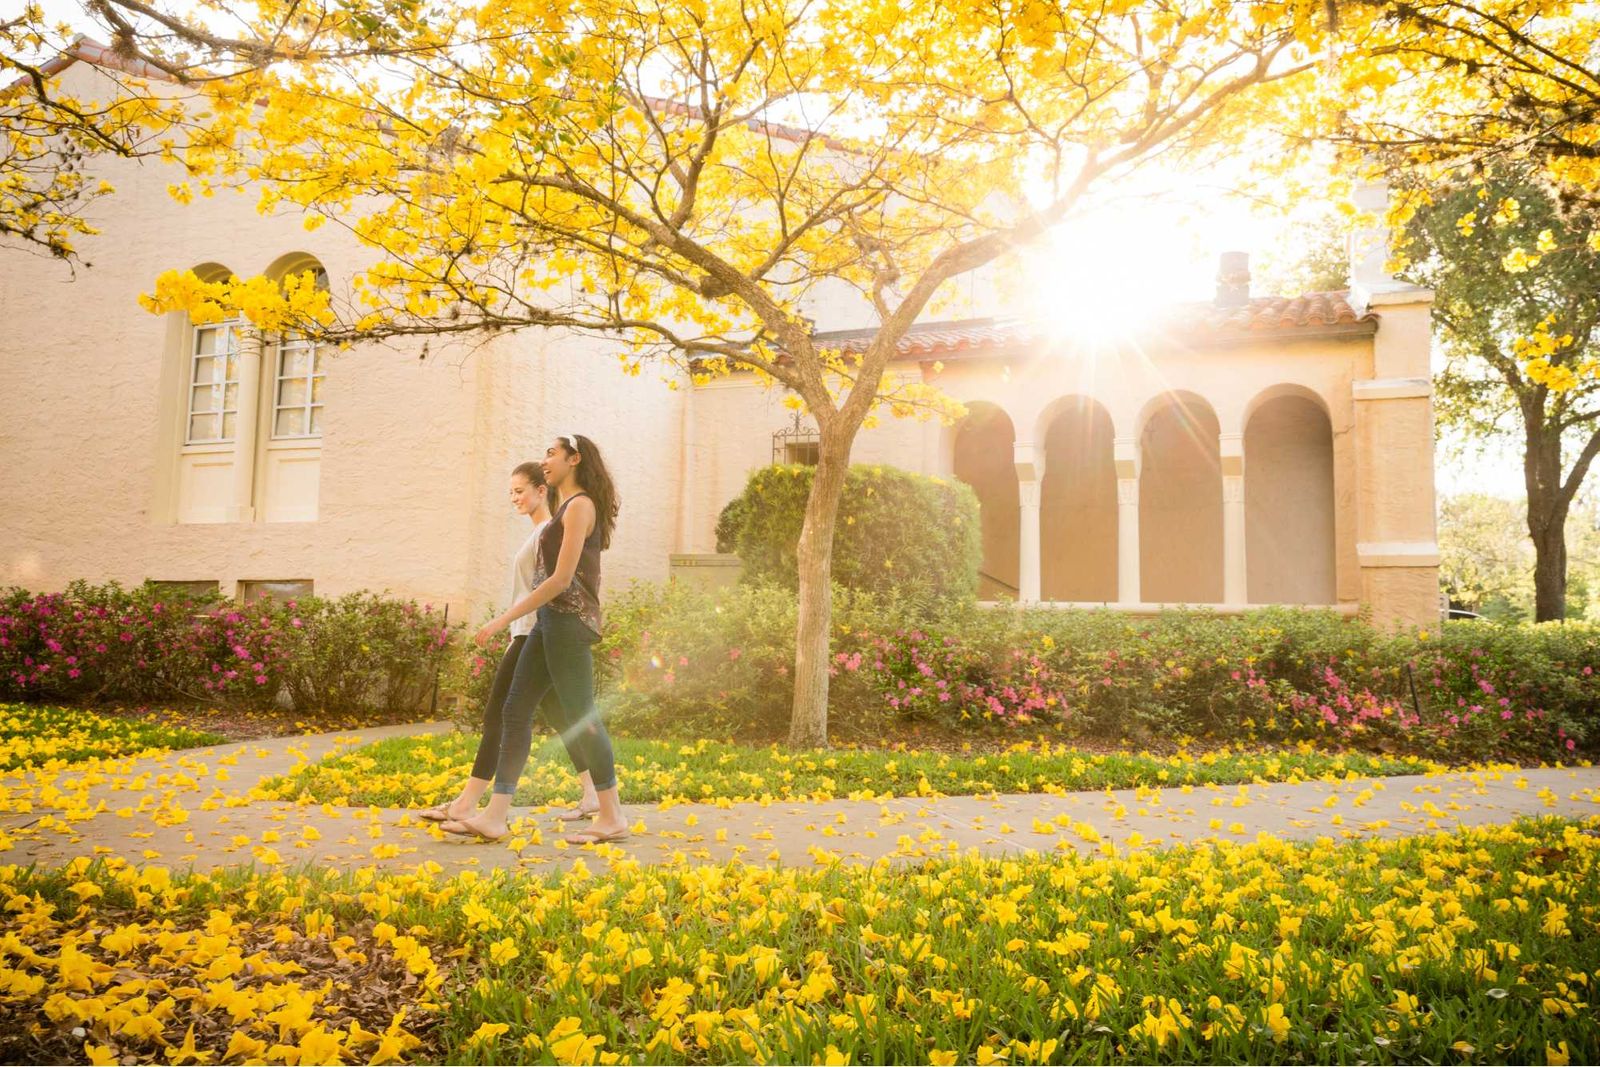 Rollins Named America’s Most Beautiful College Campus